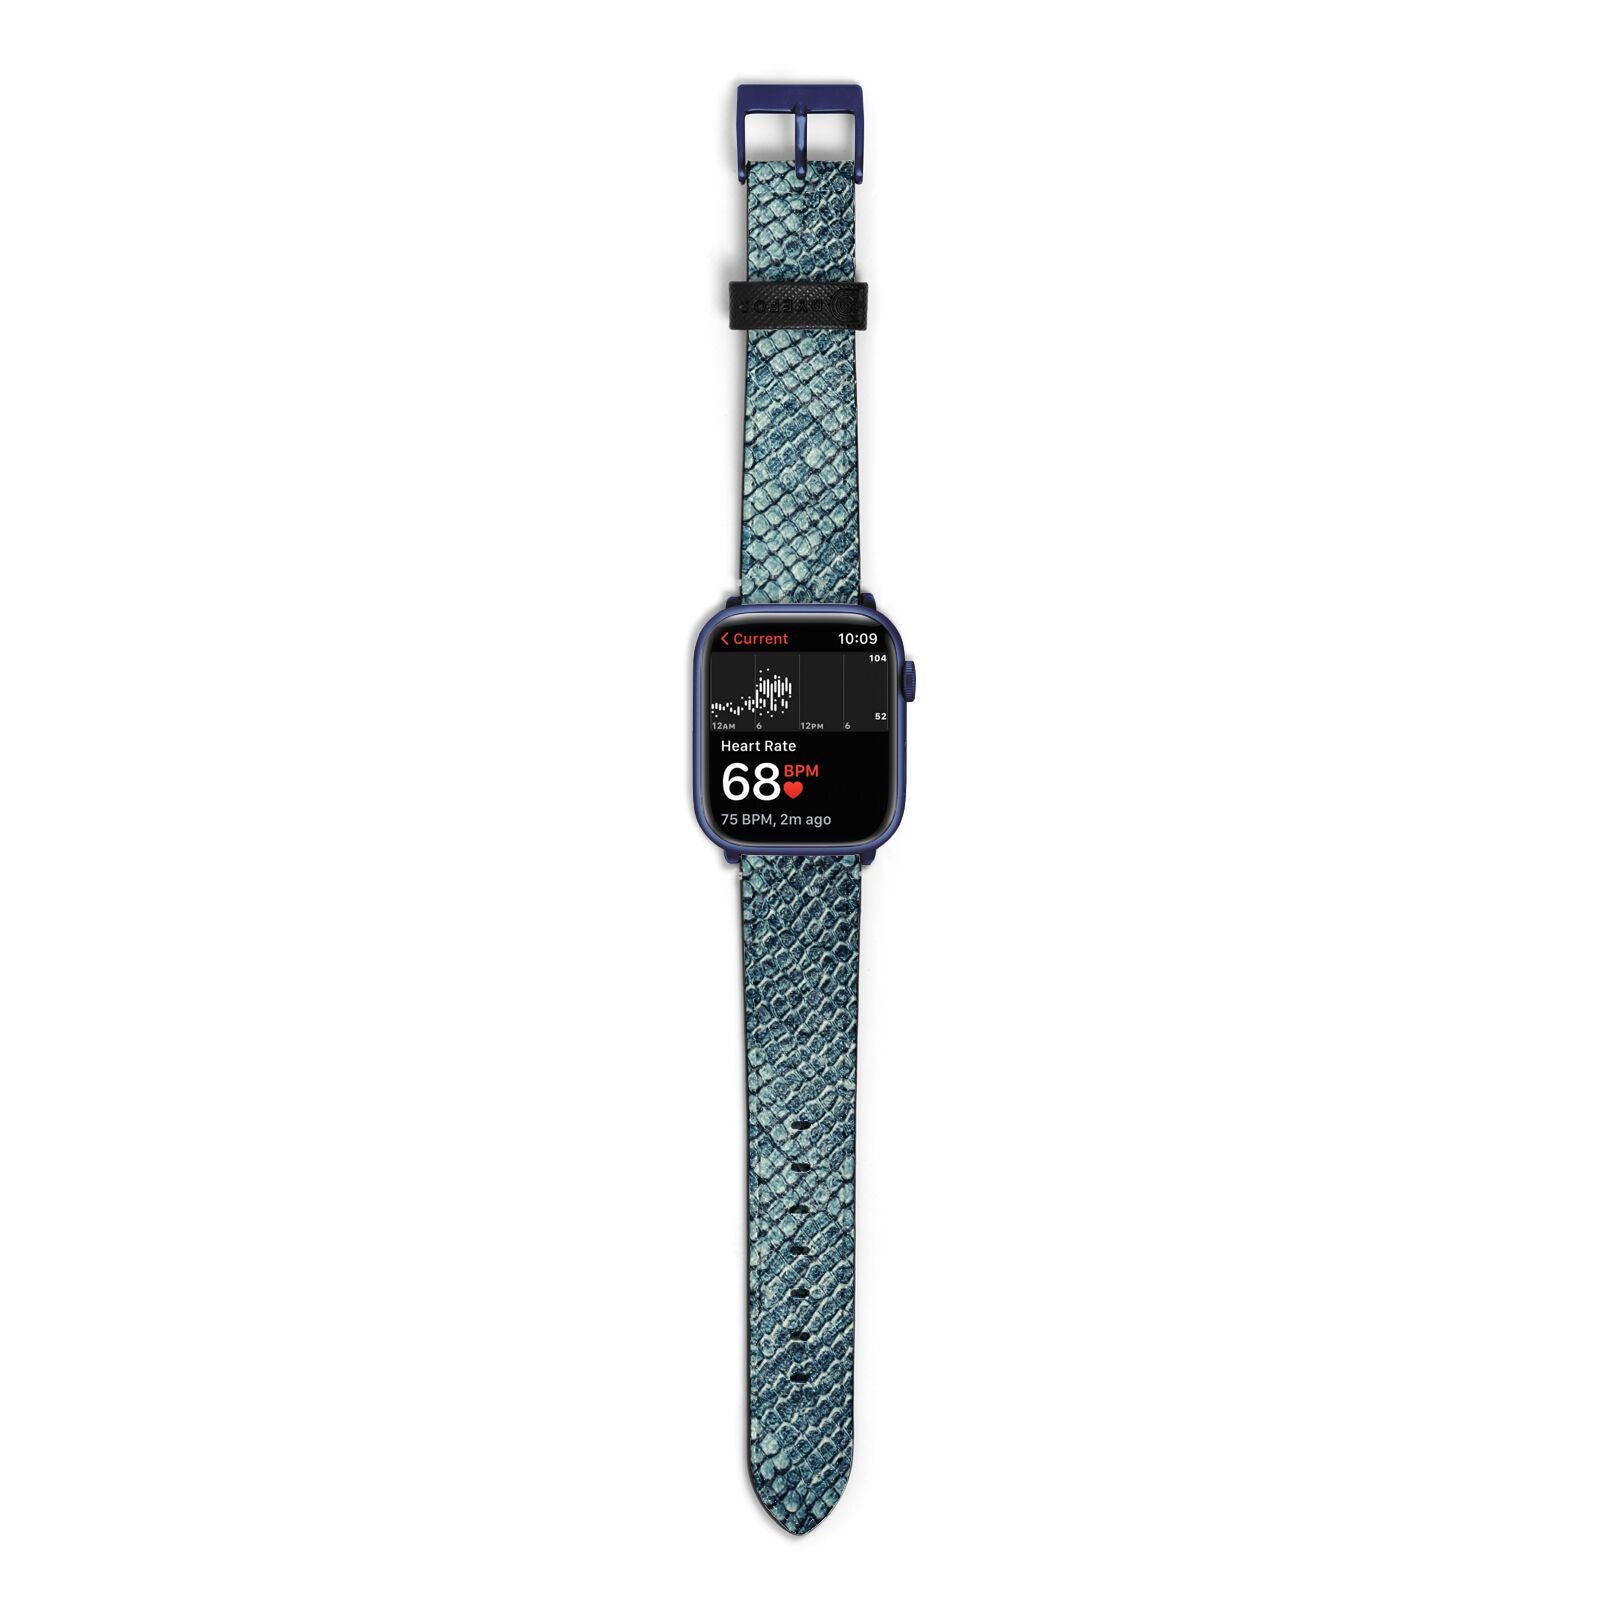 Teal Snakeskin Apple Watch Strap Size 38mm with Blue Hardware